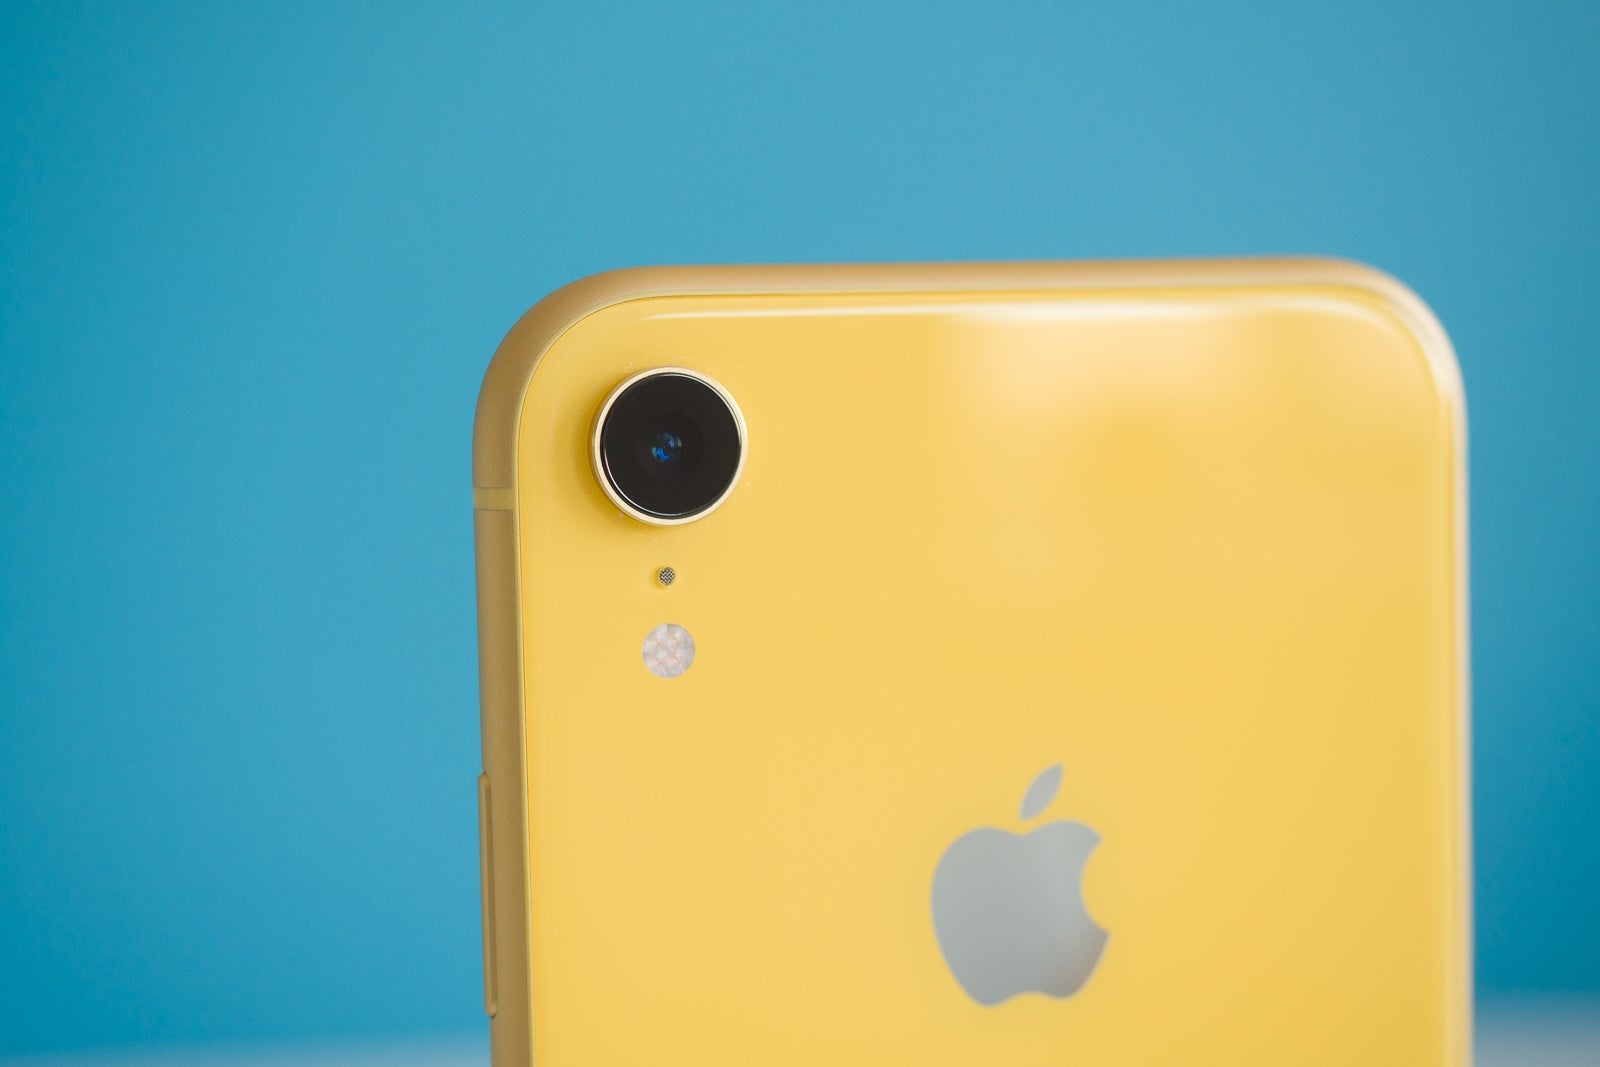 The iPhone XR 2 could gain an extra rear camera - 2019 iPhone report details new selfie camera, hidden wide-angle lens, more